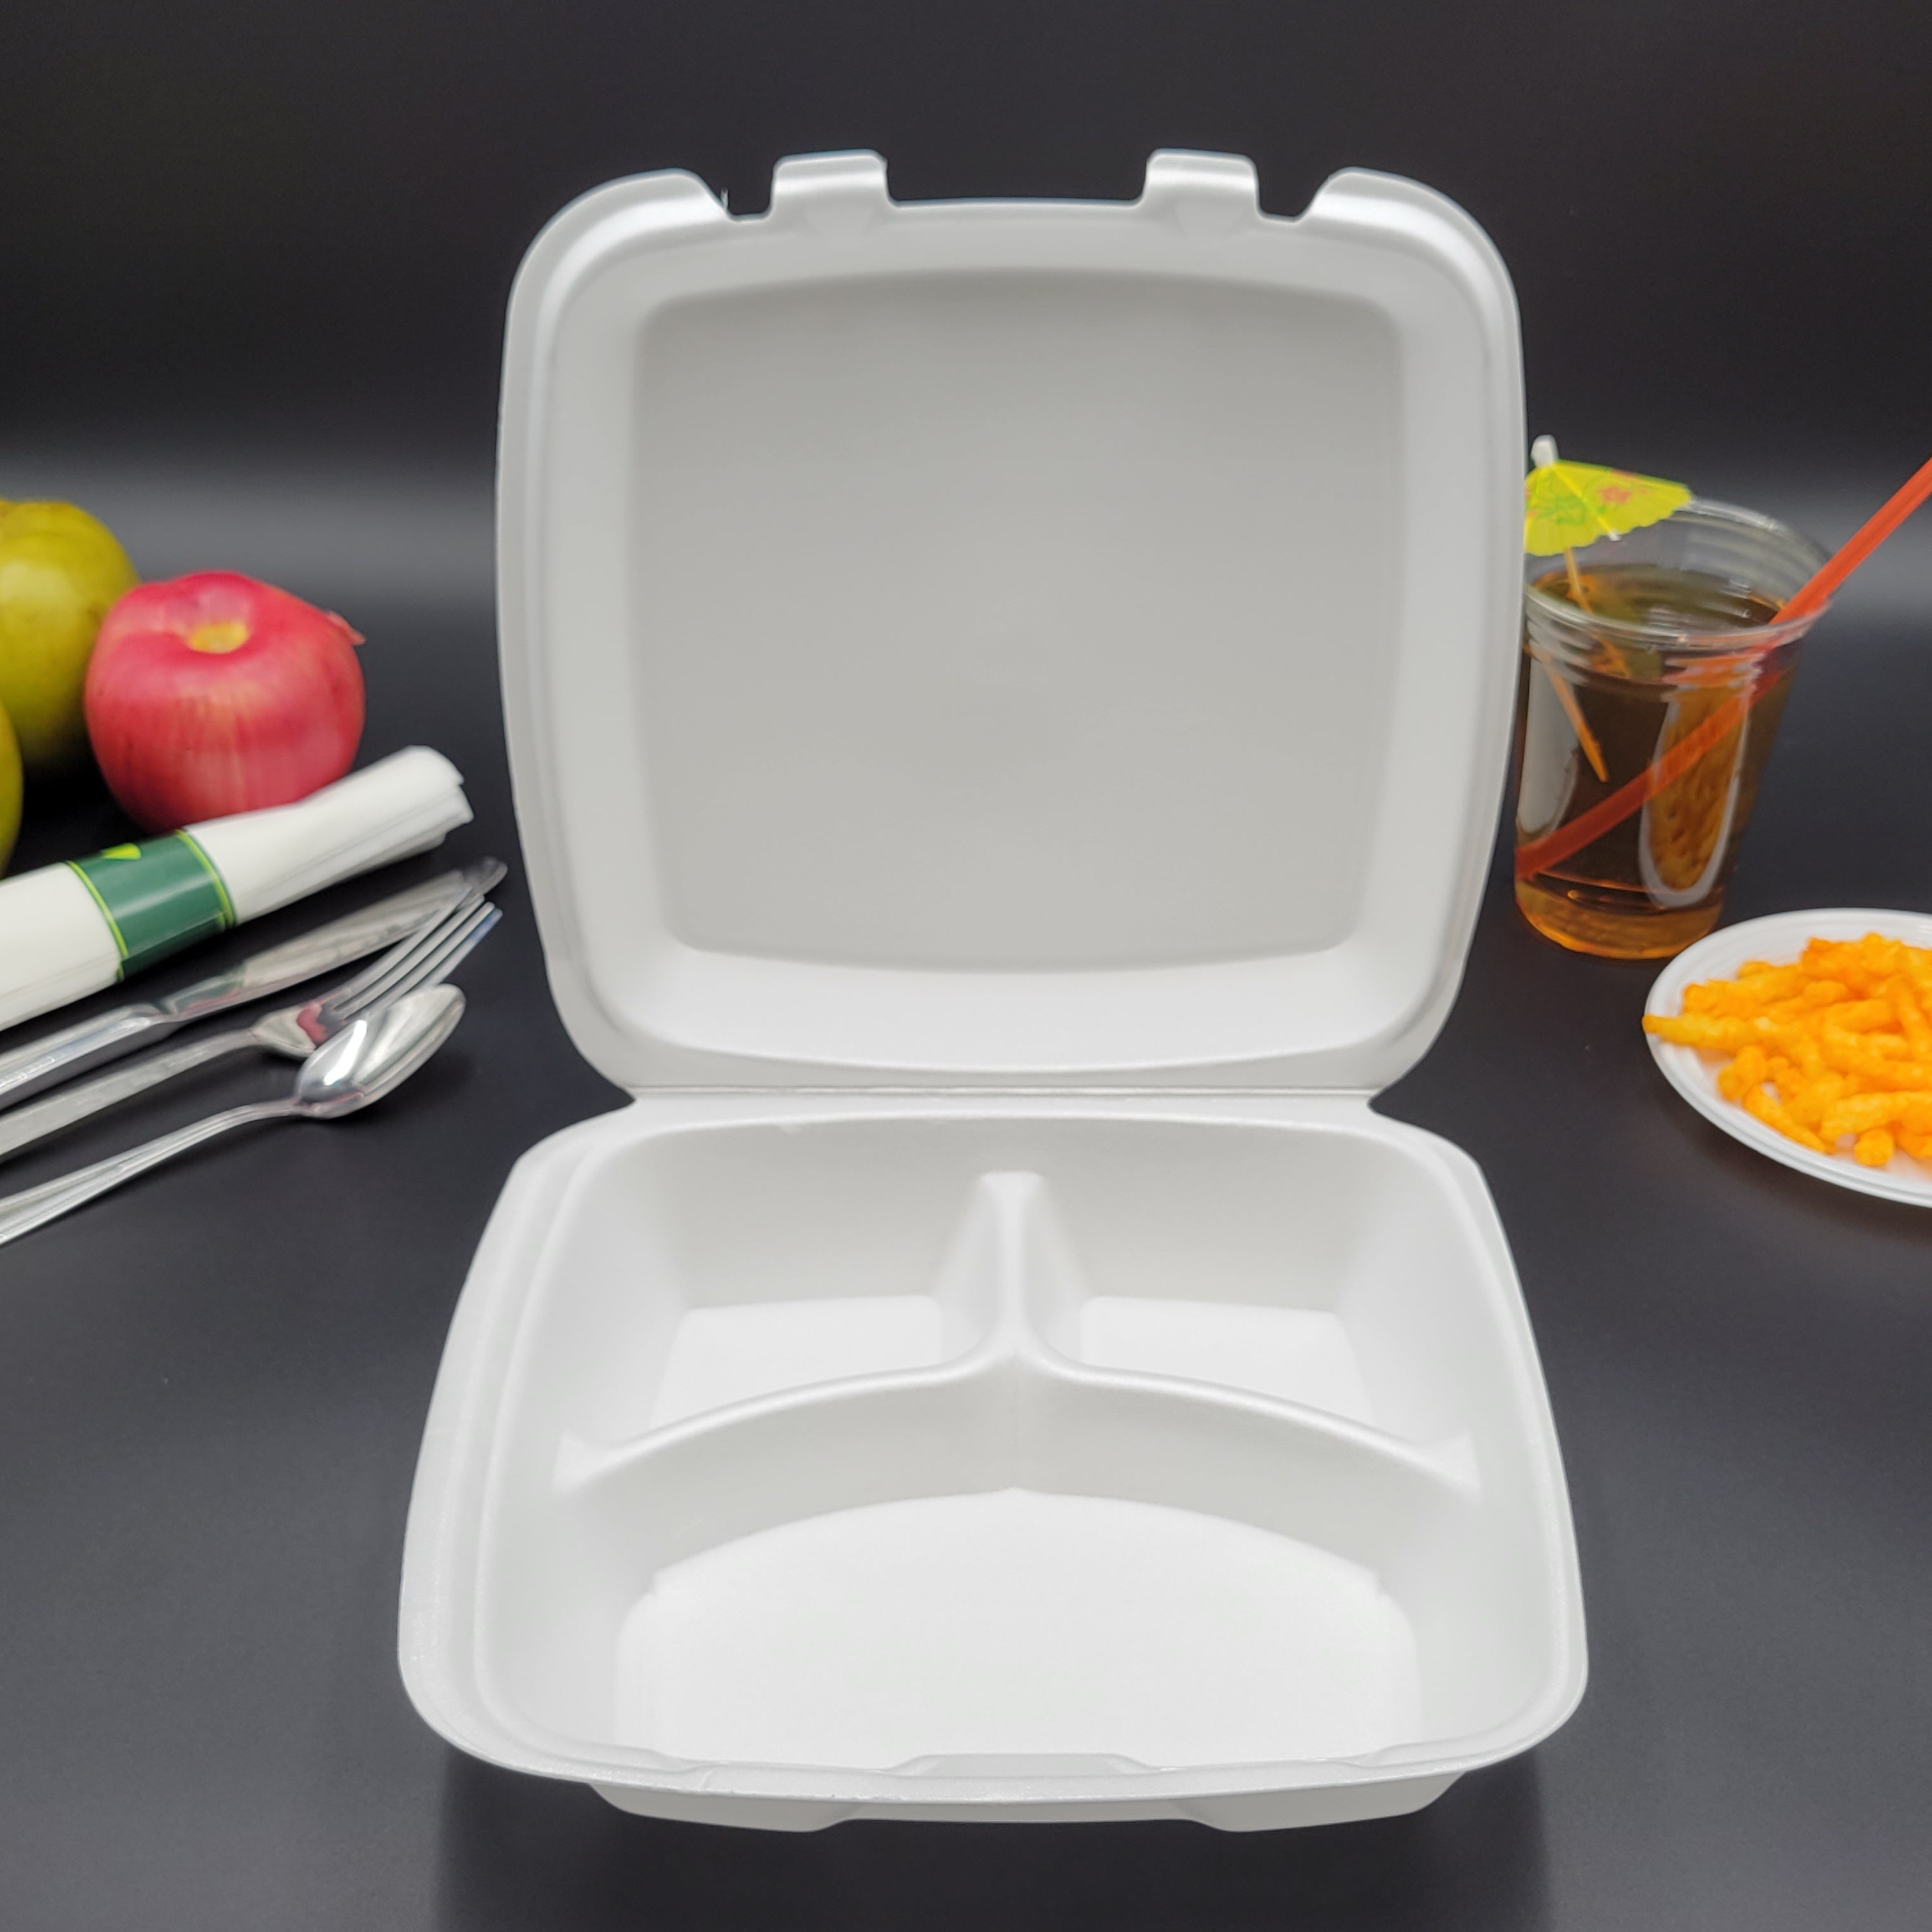 Foam Hinged Lid Containers, 9 x 9 x 3, White, 200/Carton